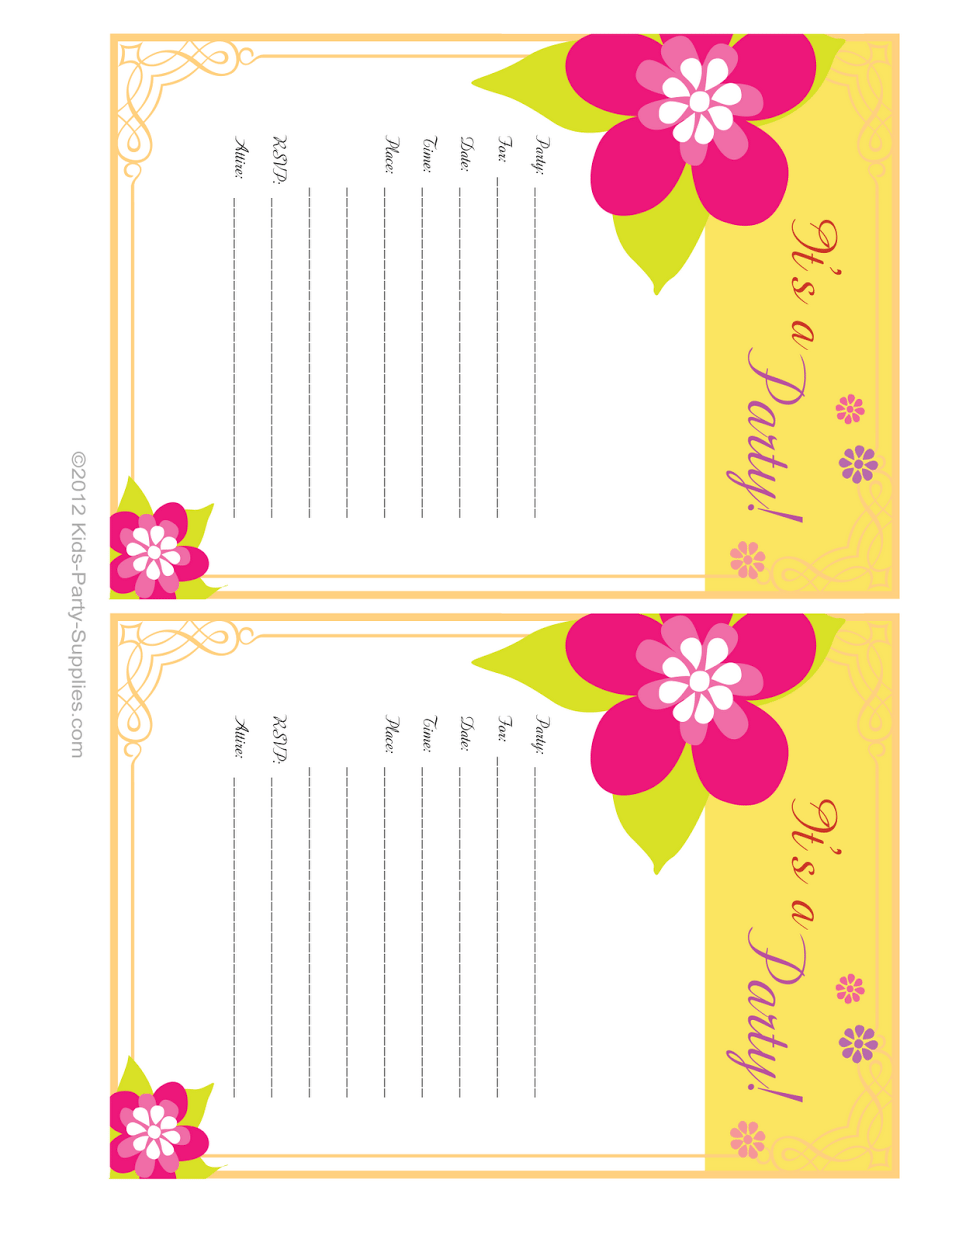 beer-party-free-printable-invitations-oh-my-fiesta-for-ladies